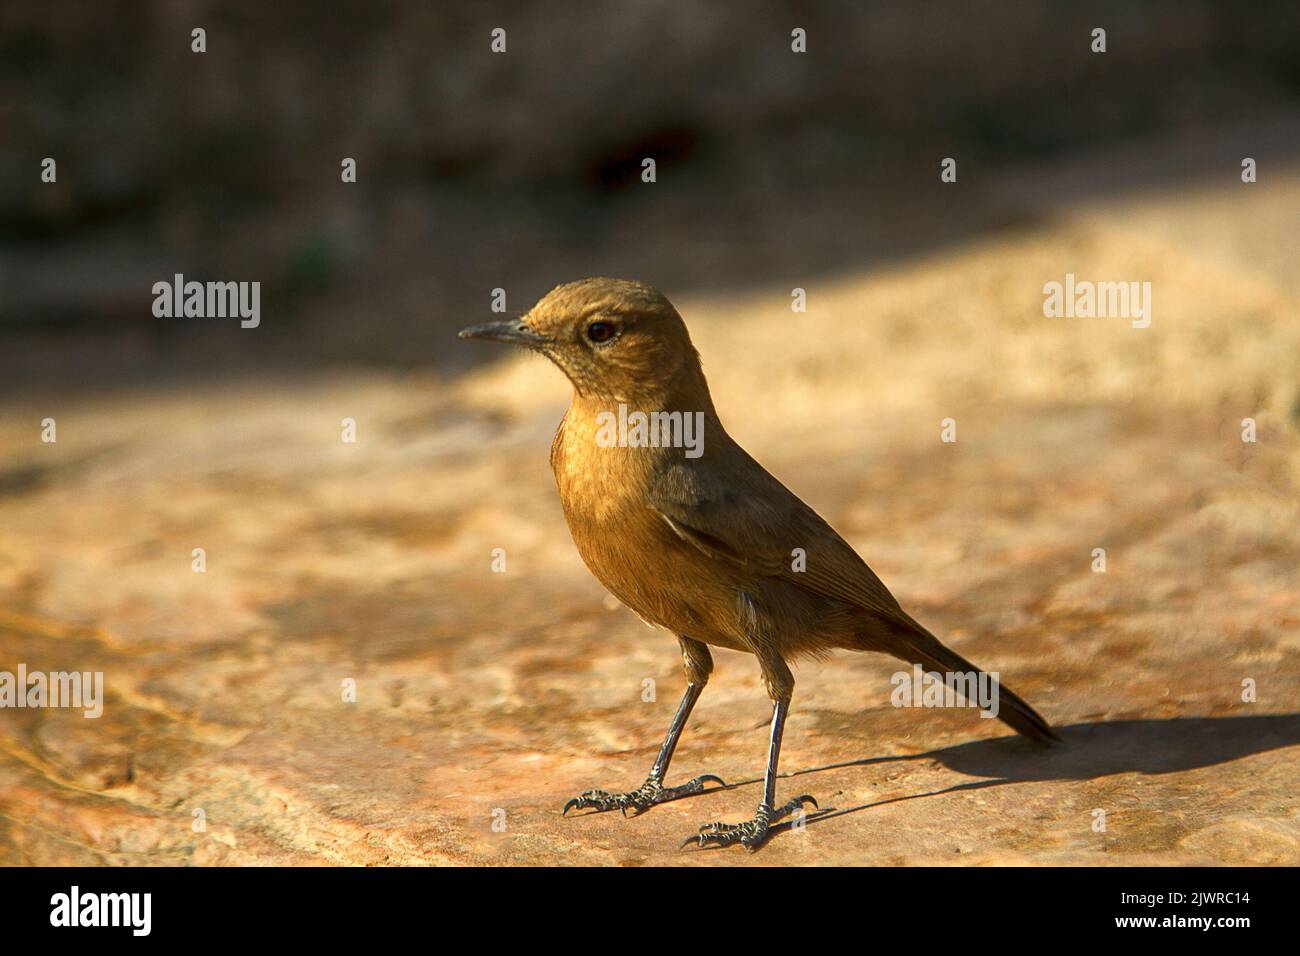 Indian chat or Brown rock chat (Oenanthe fusca, or Saxicola fusca, Cercomela fusca) in India. Deccan plateau, wintertime. Mocking-bird Stock Photo